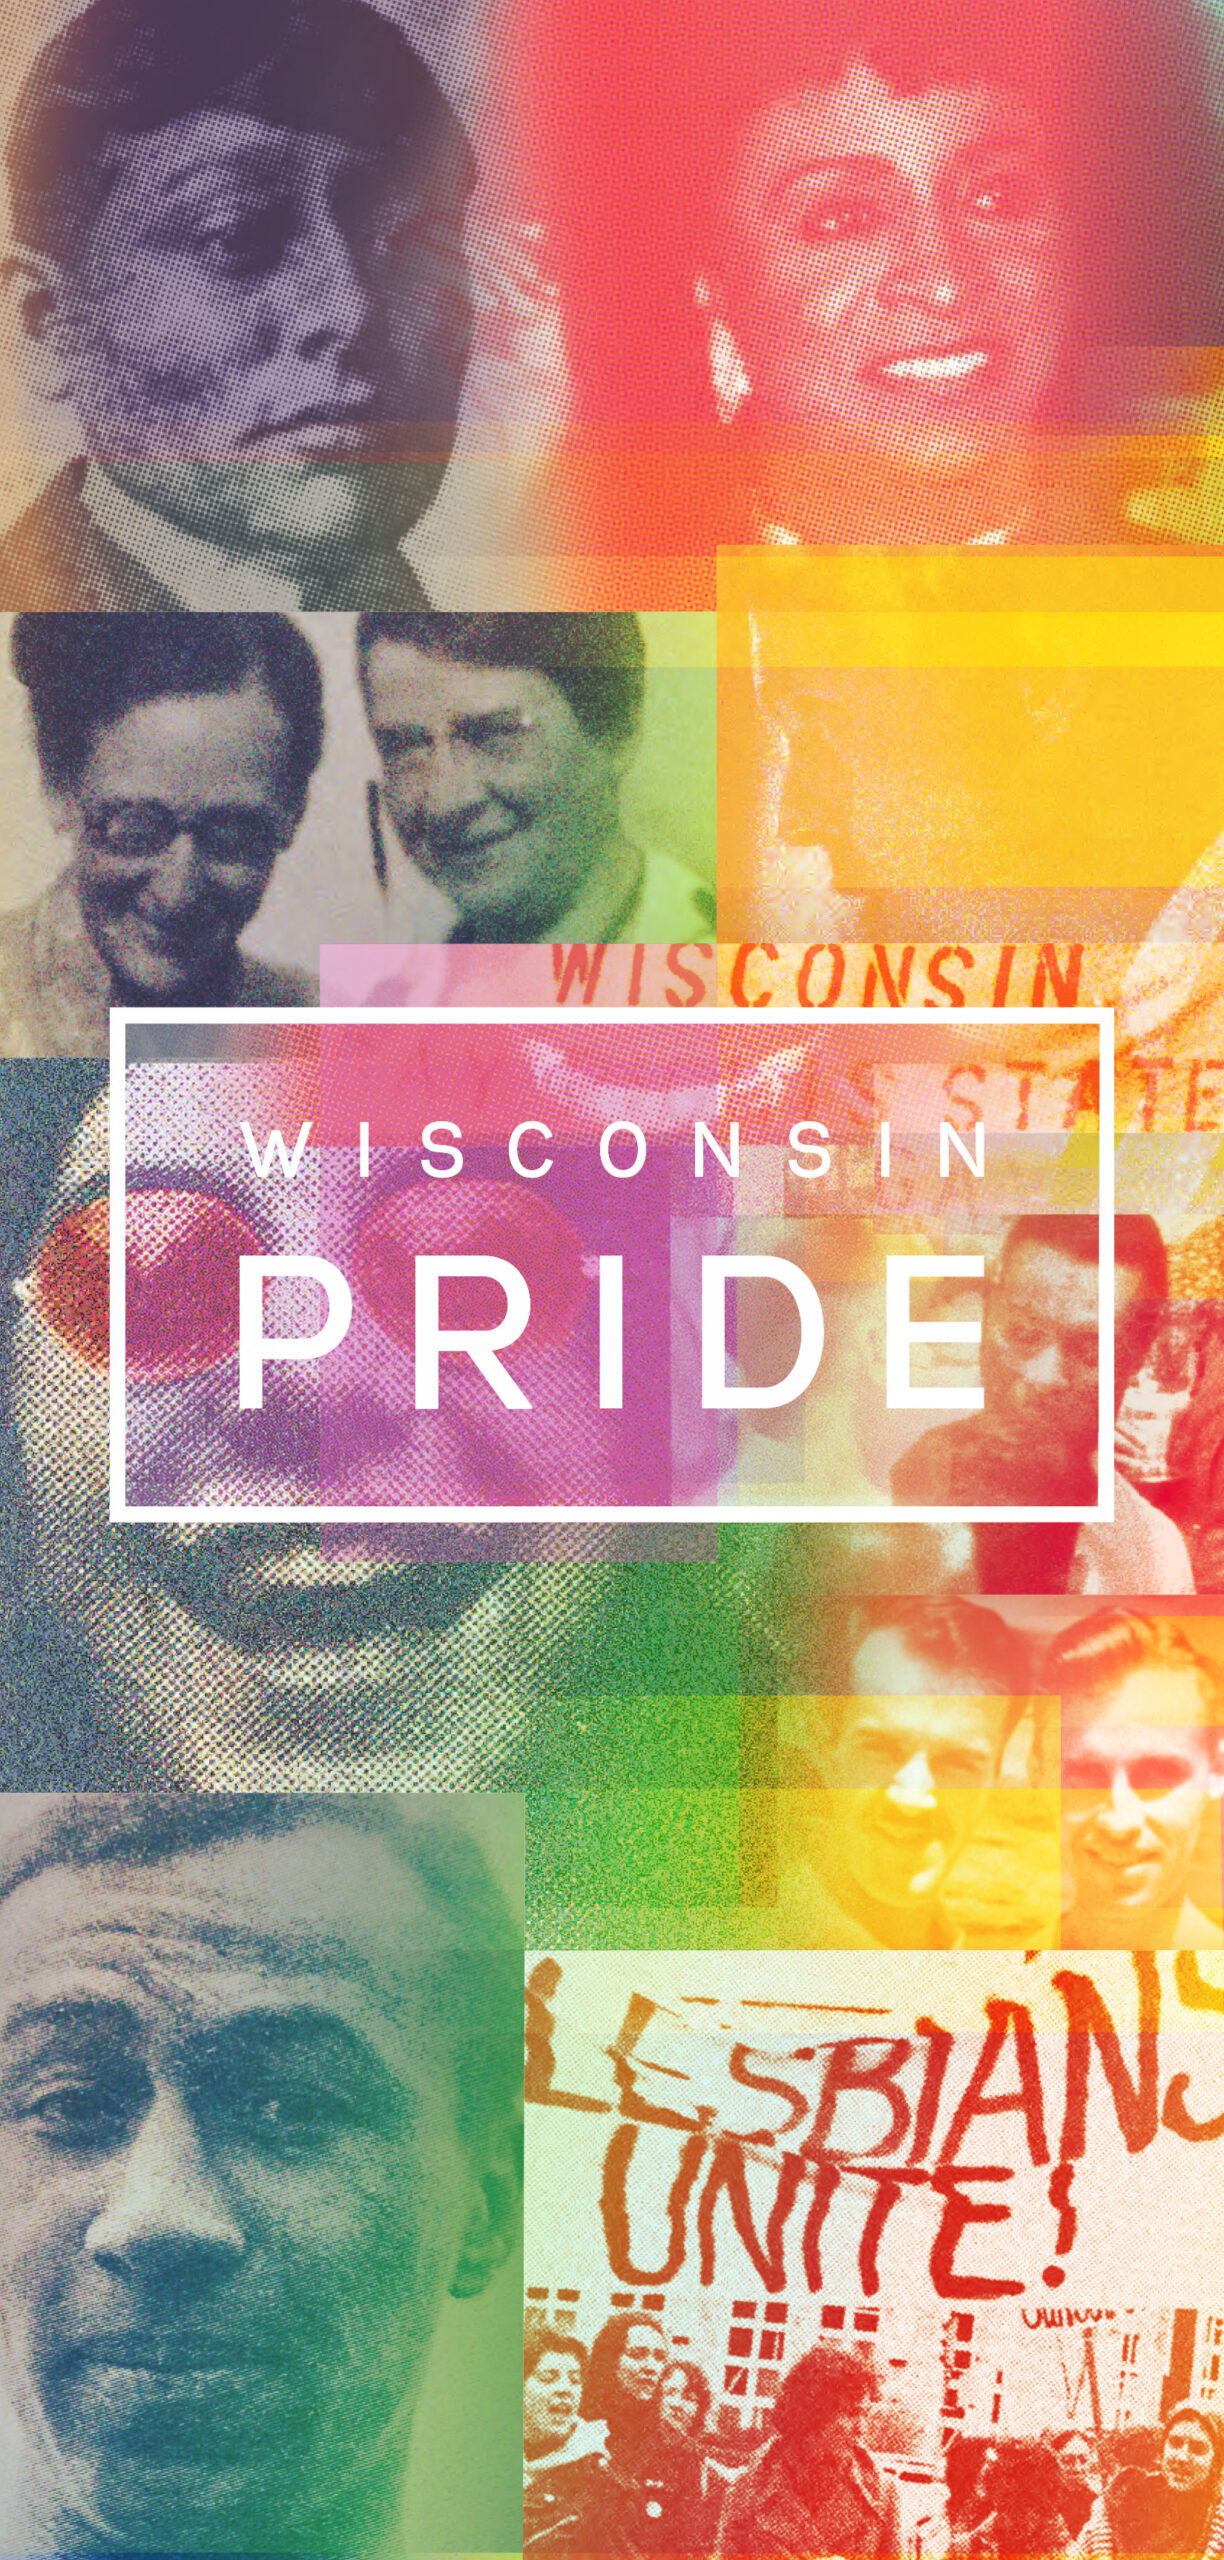 Poster for the documentary Wisconsin Pride.